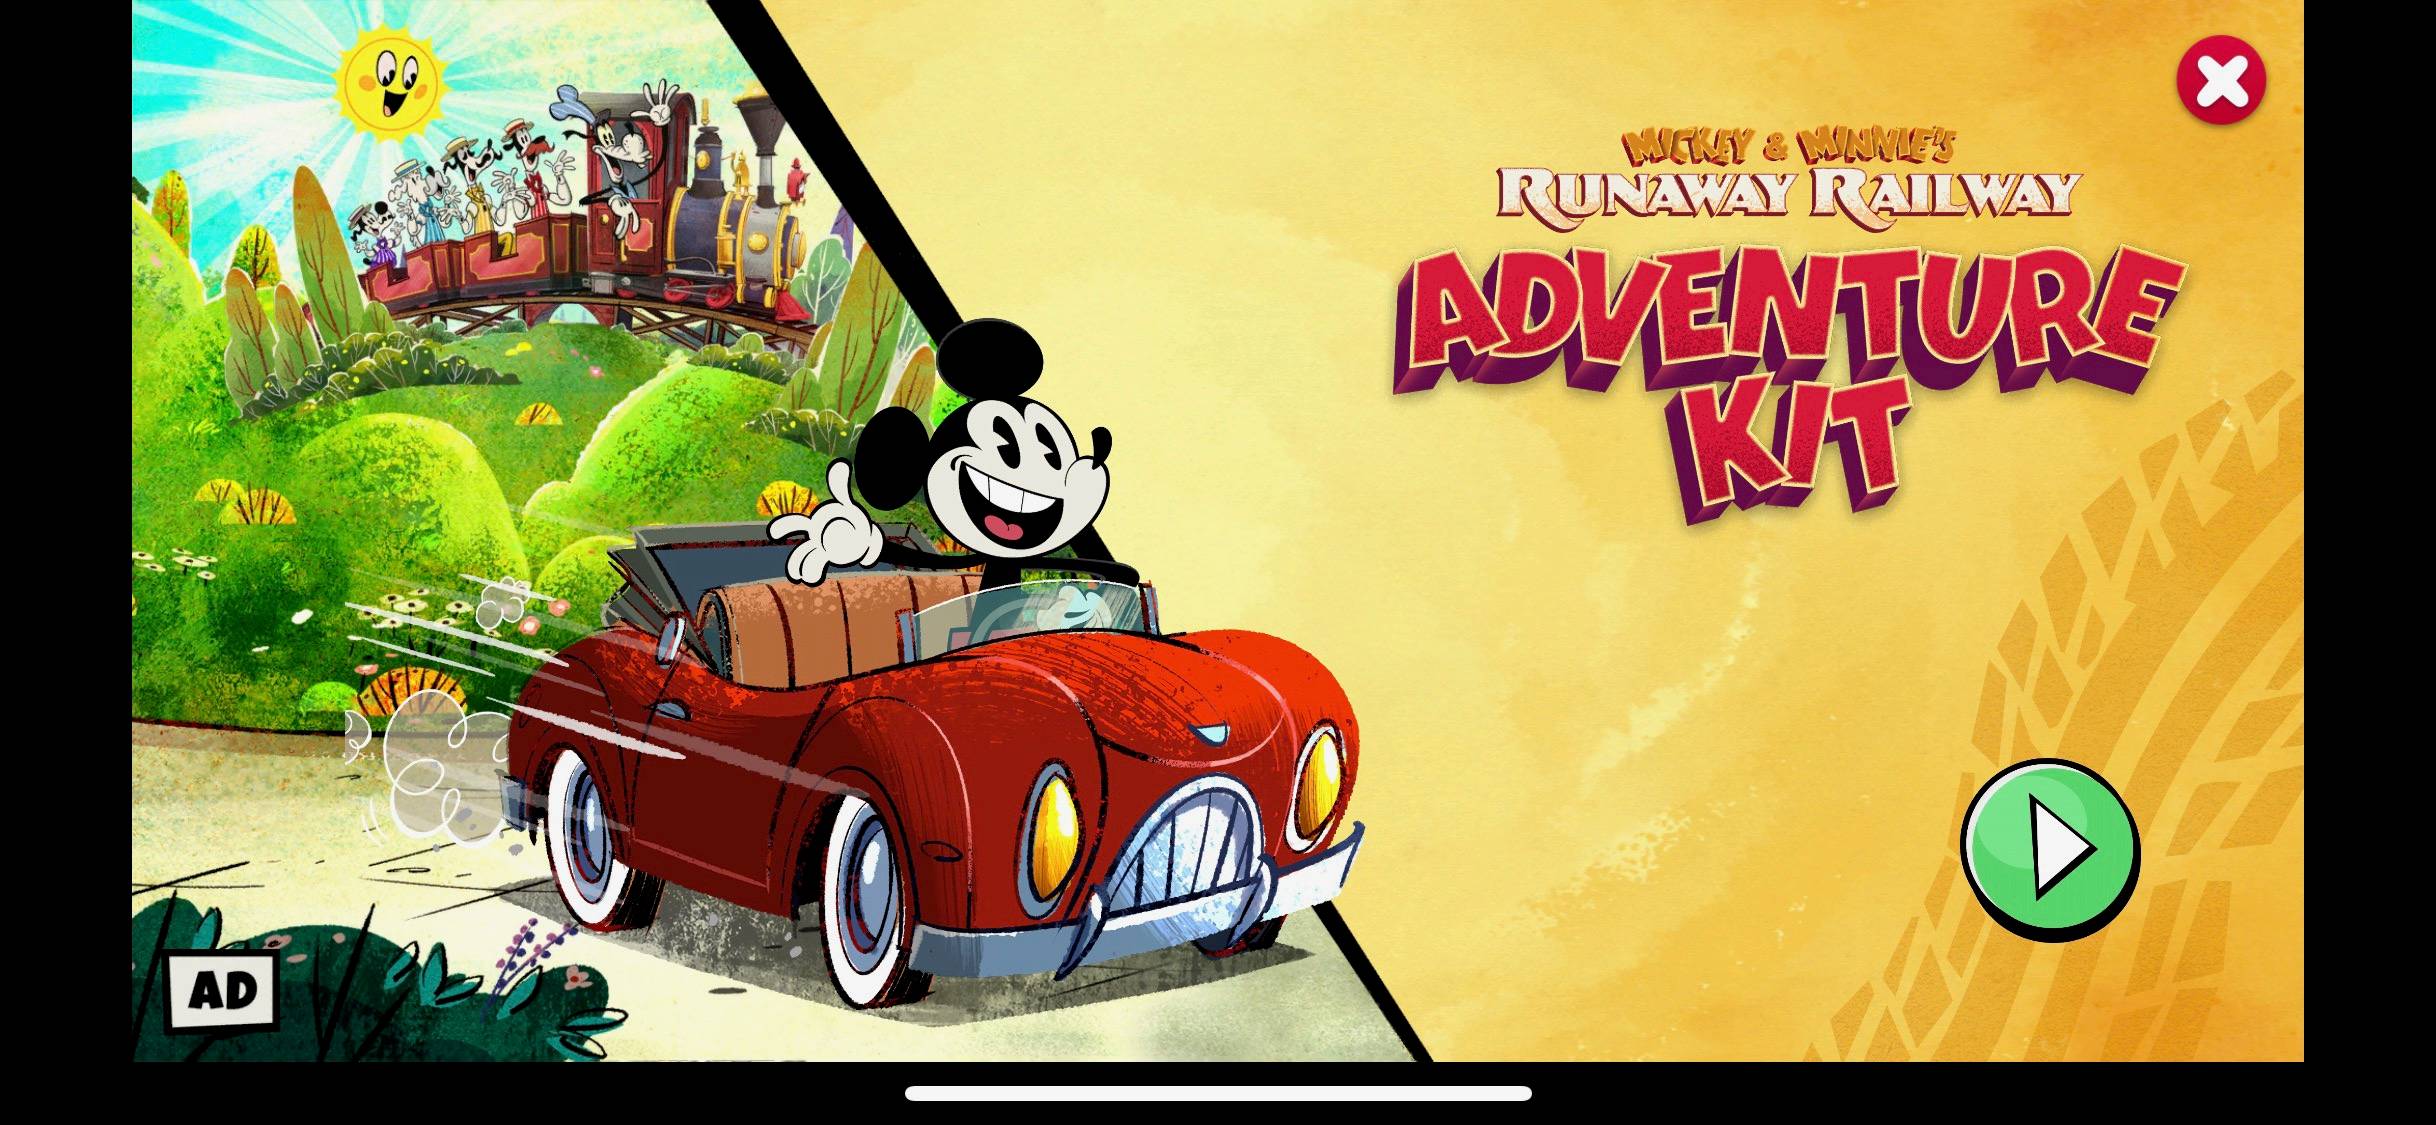 Mickey and Minnie's Runaway Railway Adventure Kit brings ride-inspired gameplay via AR to your home